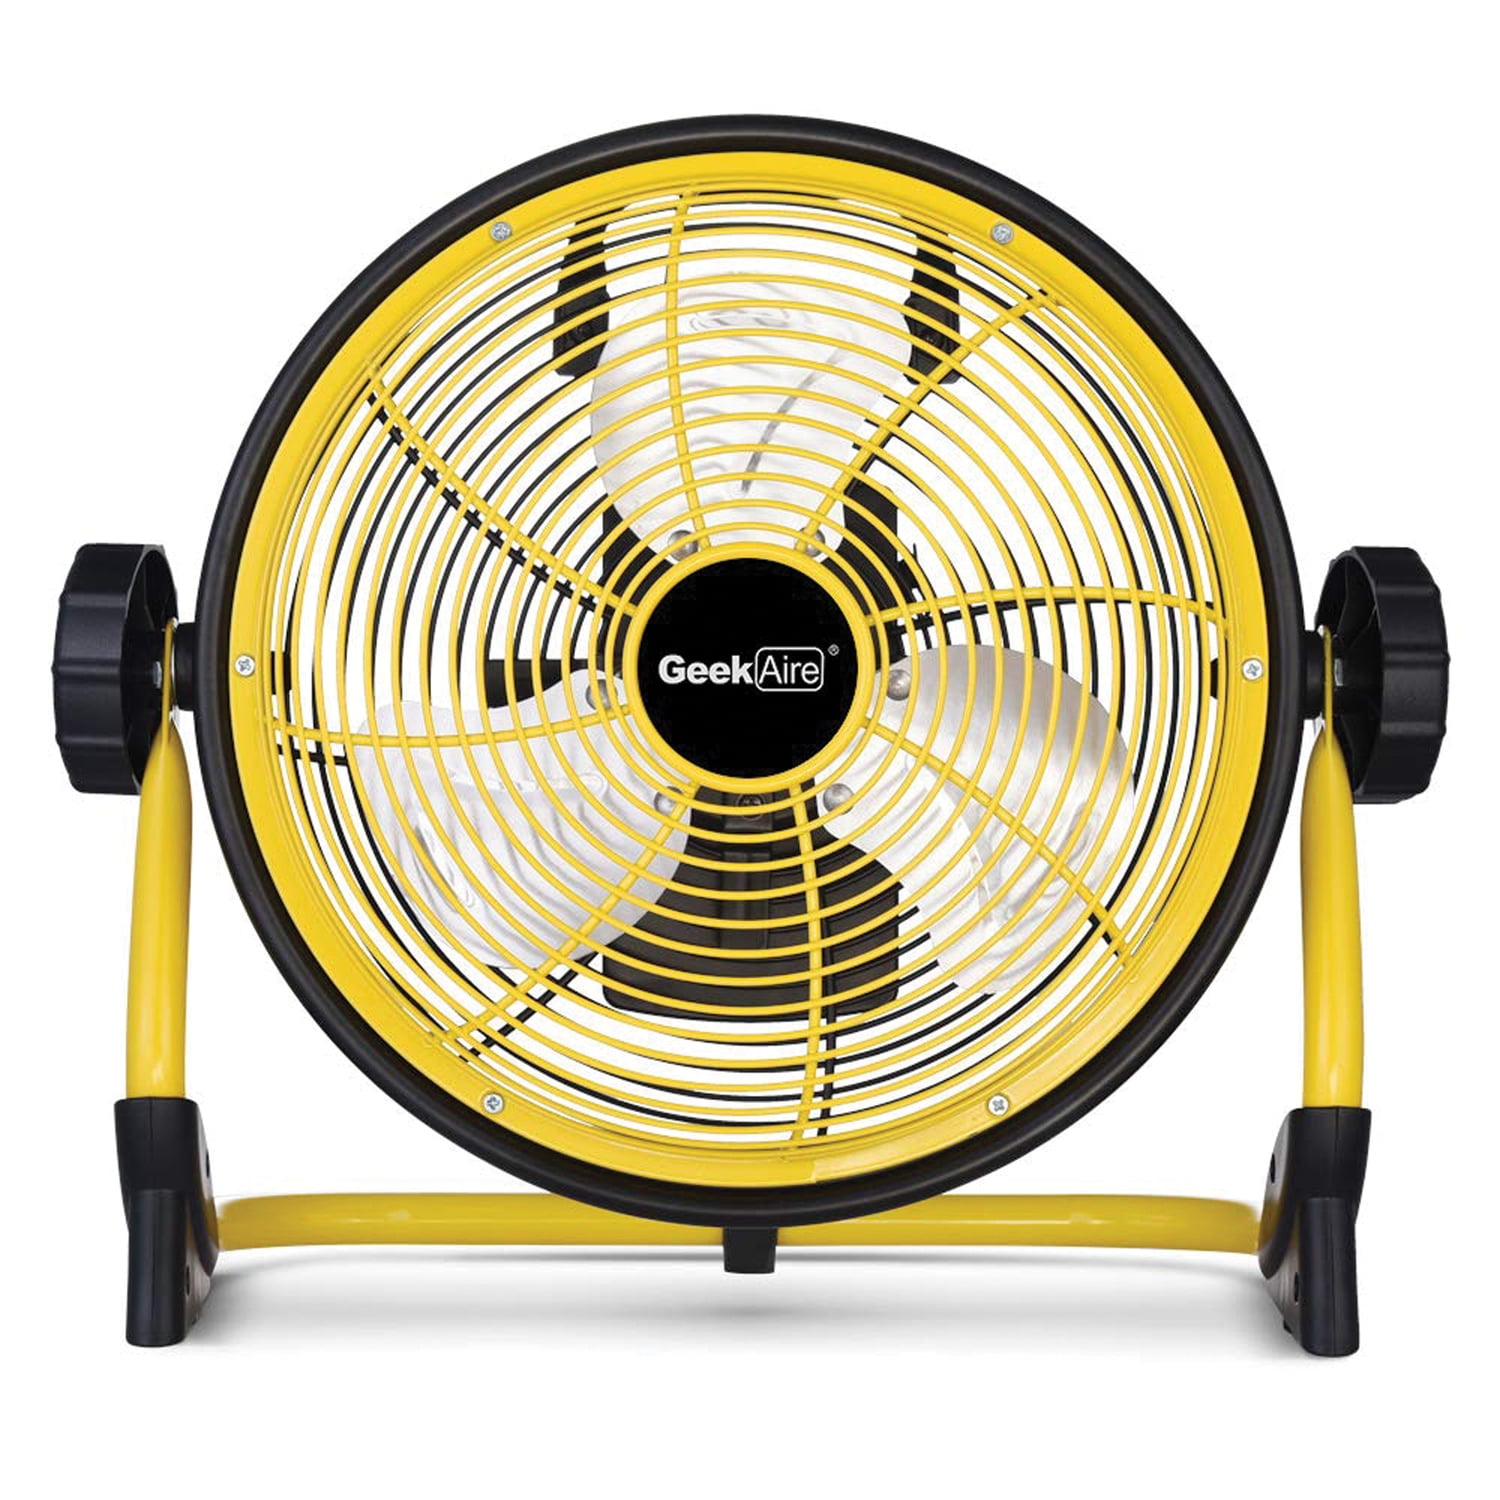 Details about   Stanley 16 Inch Industrial High Velocity Floor Fans Direct Drive All-Metal 3spee 